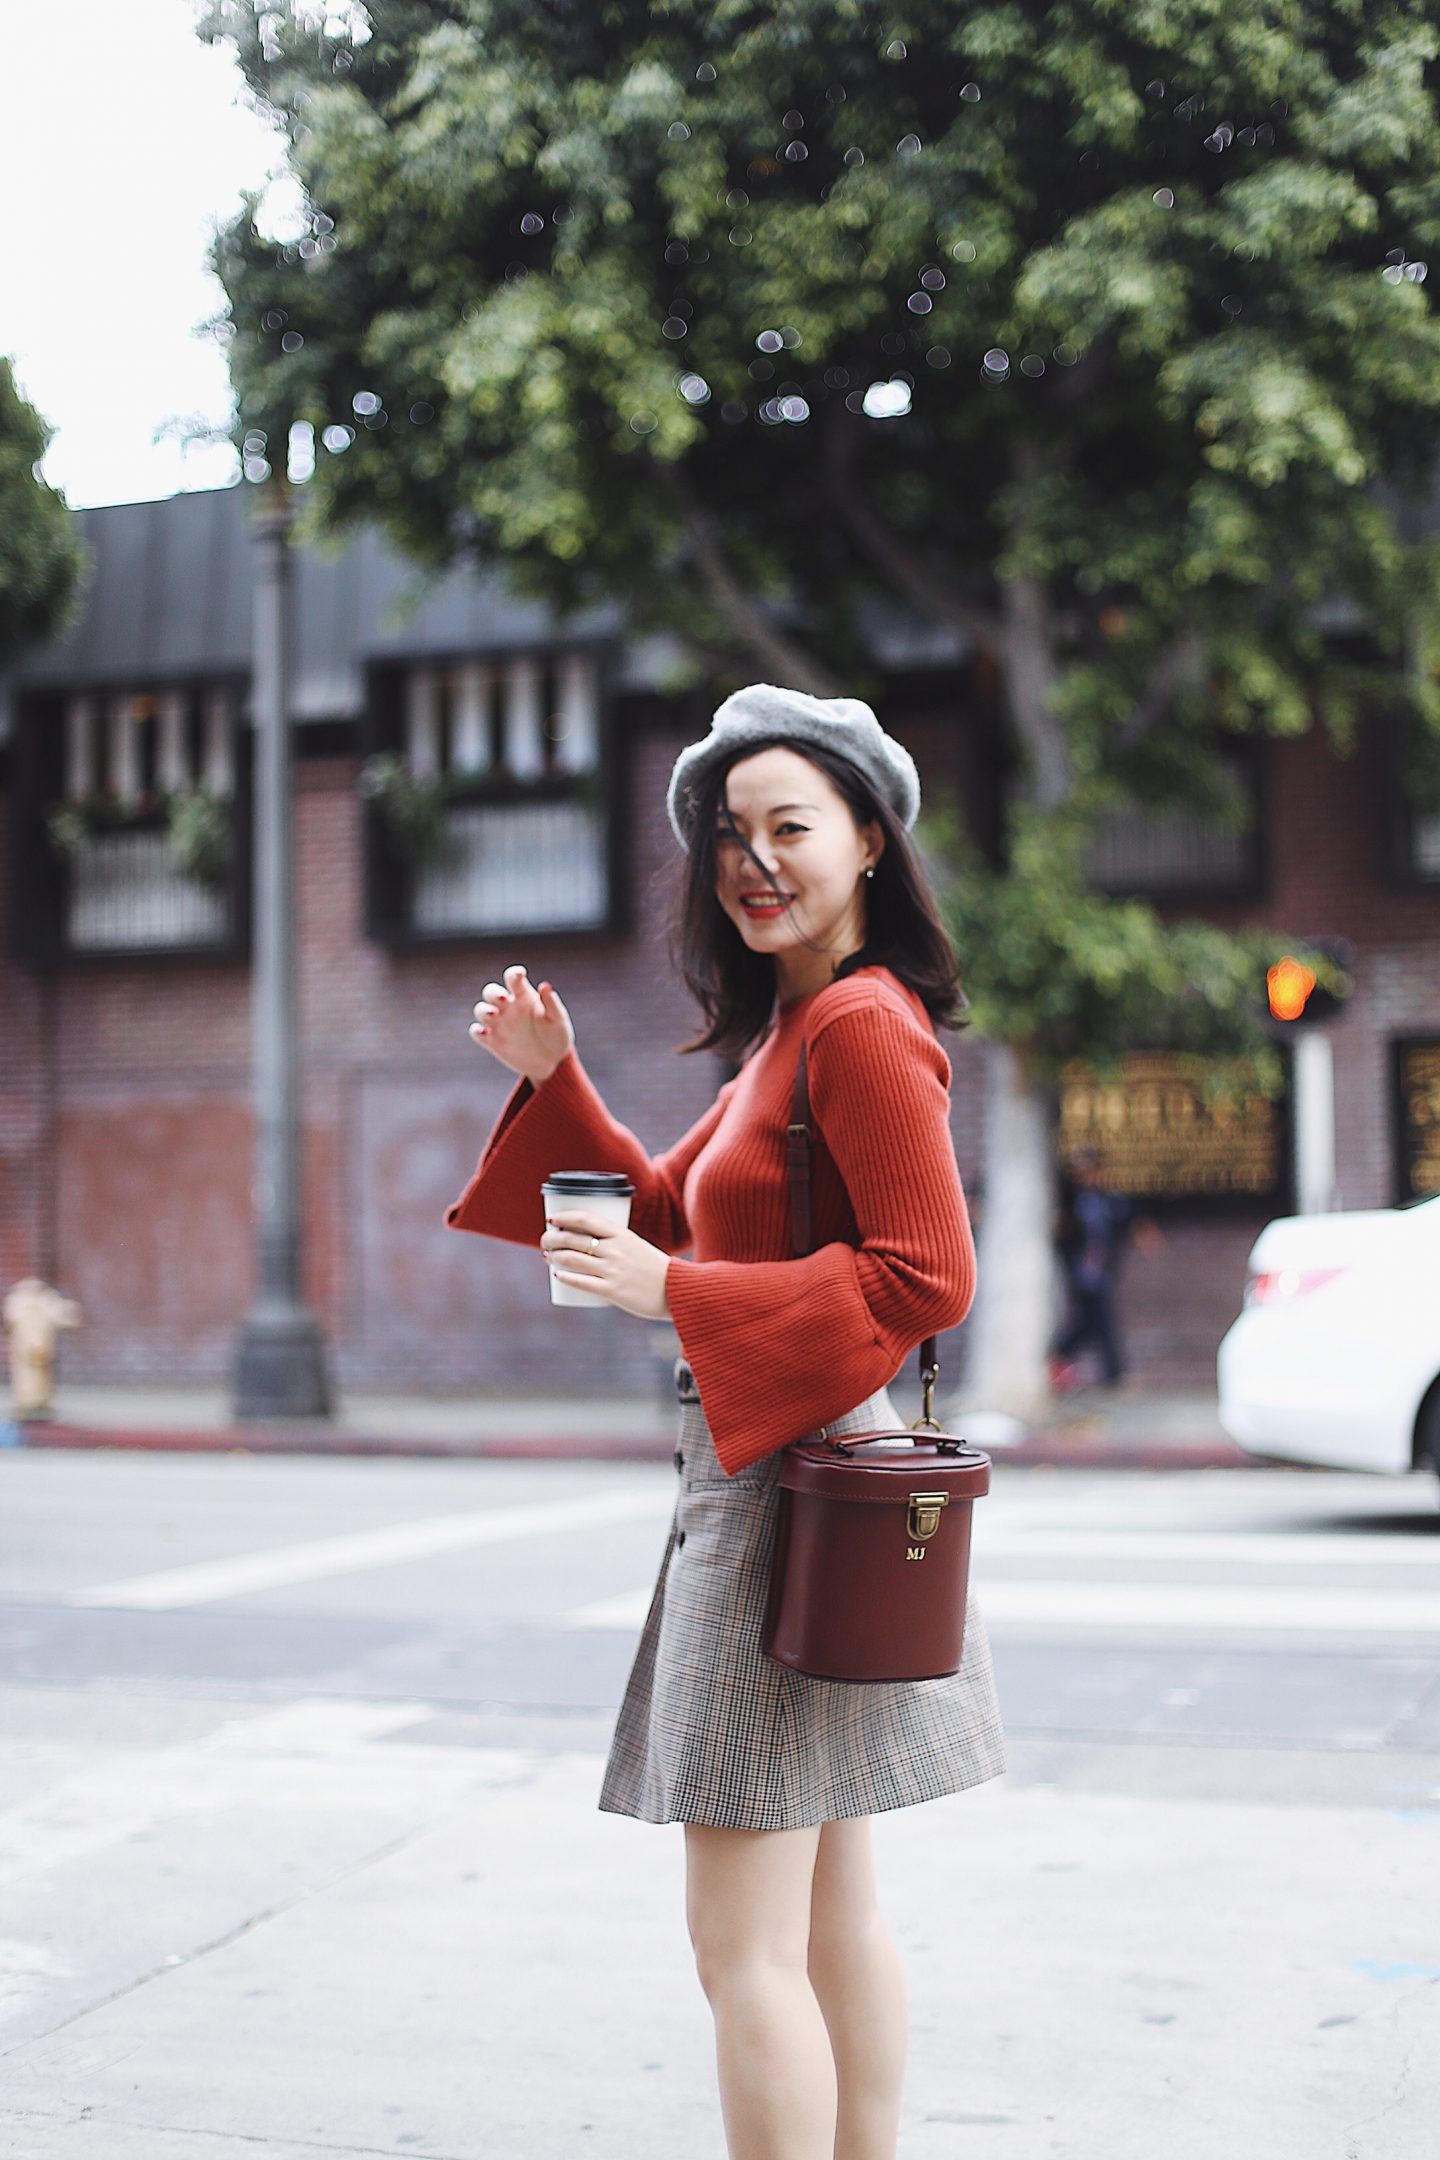 1 piece 2 ways - pairing checkered skirt with beret brown bag and bell sleeved red top 